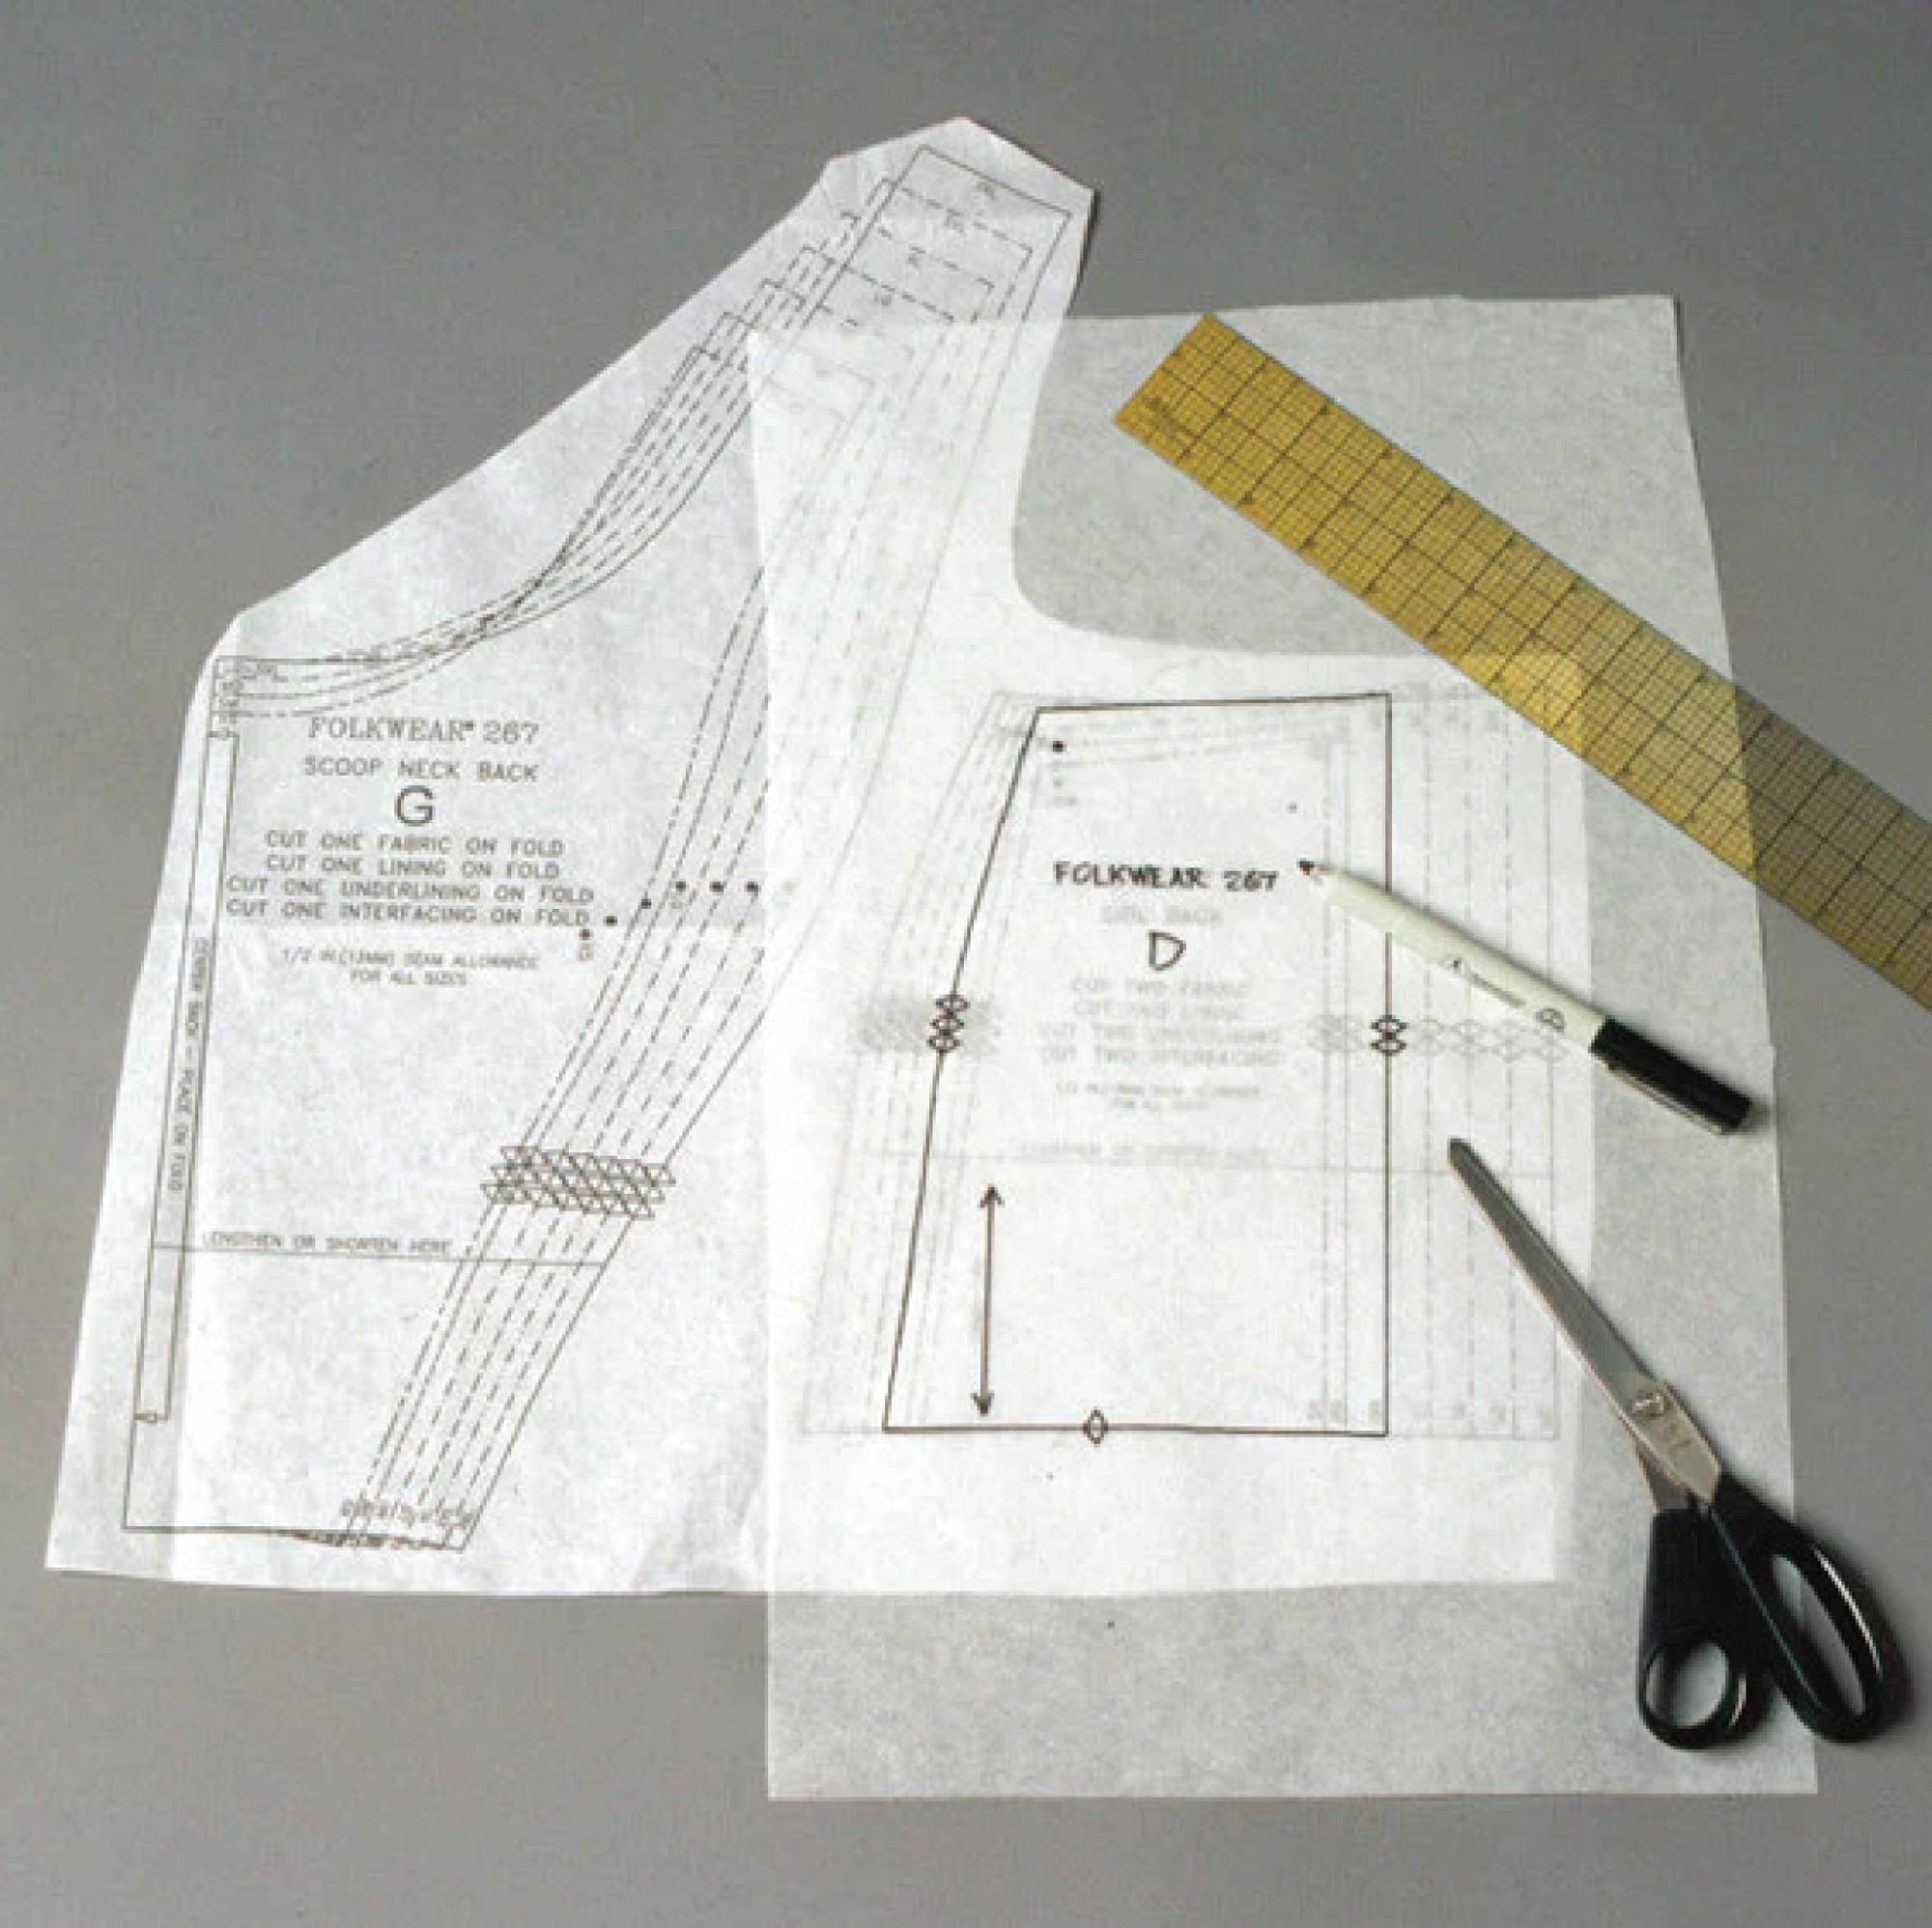 Tracing fabric on top of a sewing pattern along with scissors, a pen, and a ruler. 